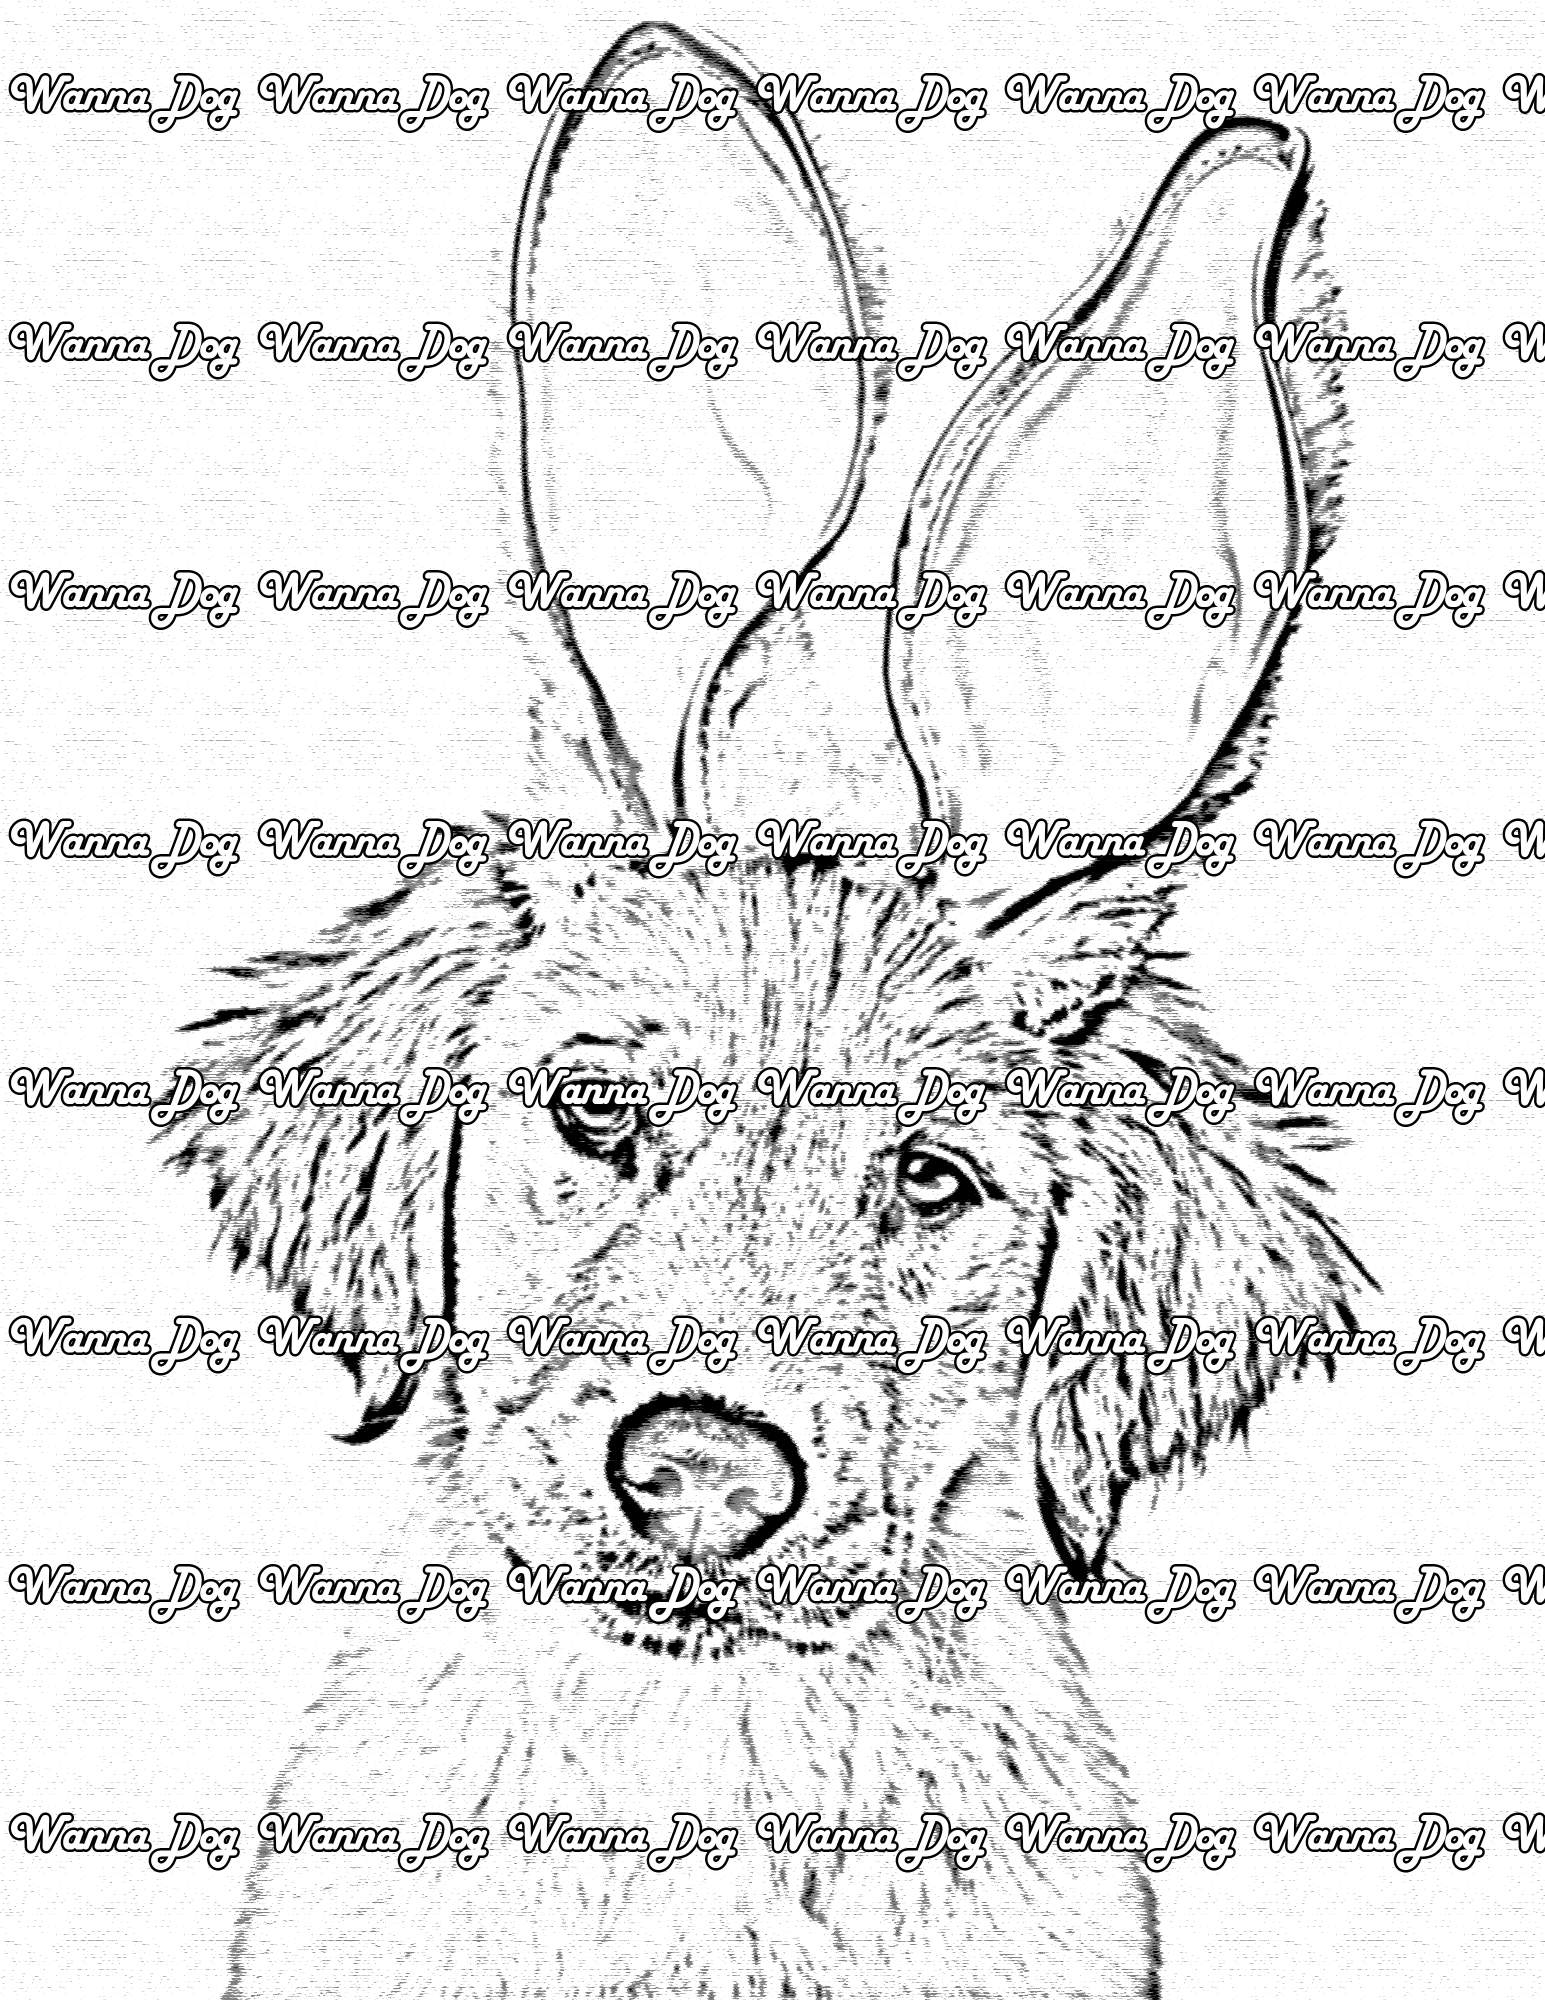 Golden Retriever Puppy Coloring Page of a Golden Retriever Puppy in bunny ears